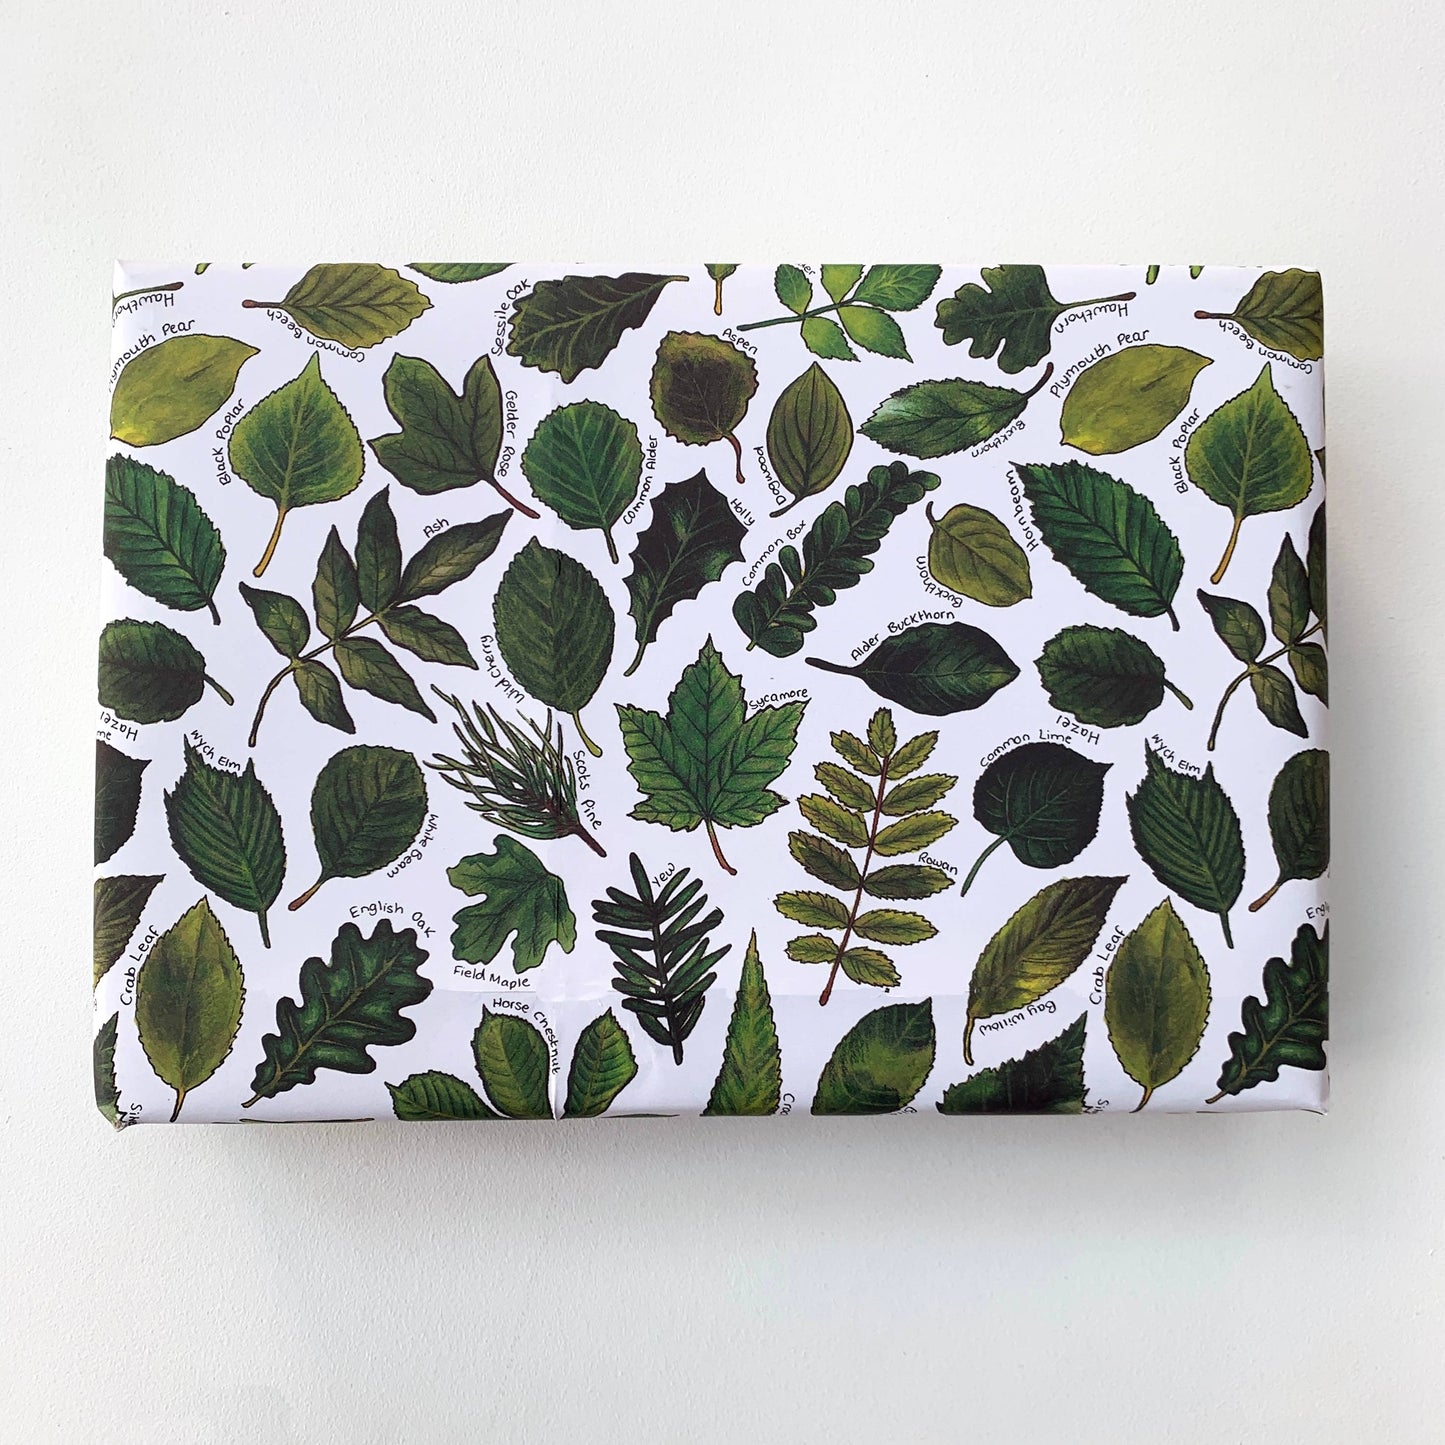 Leaves of Britain wrapping paper Sheets